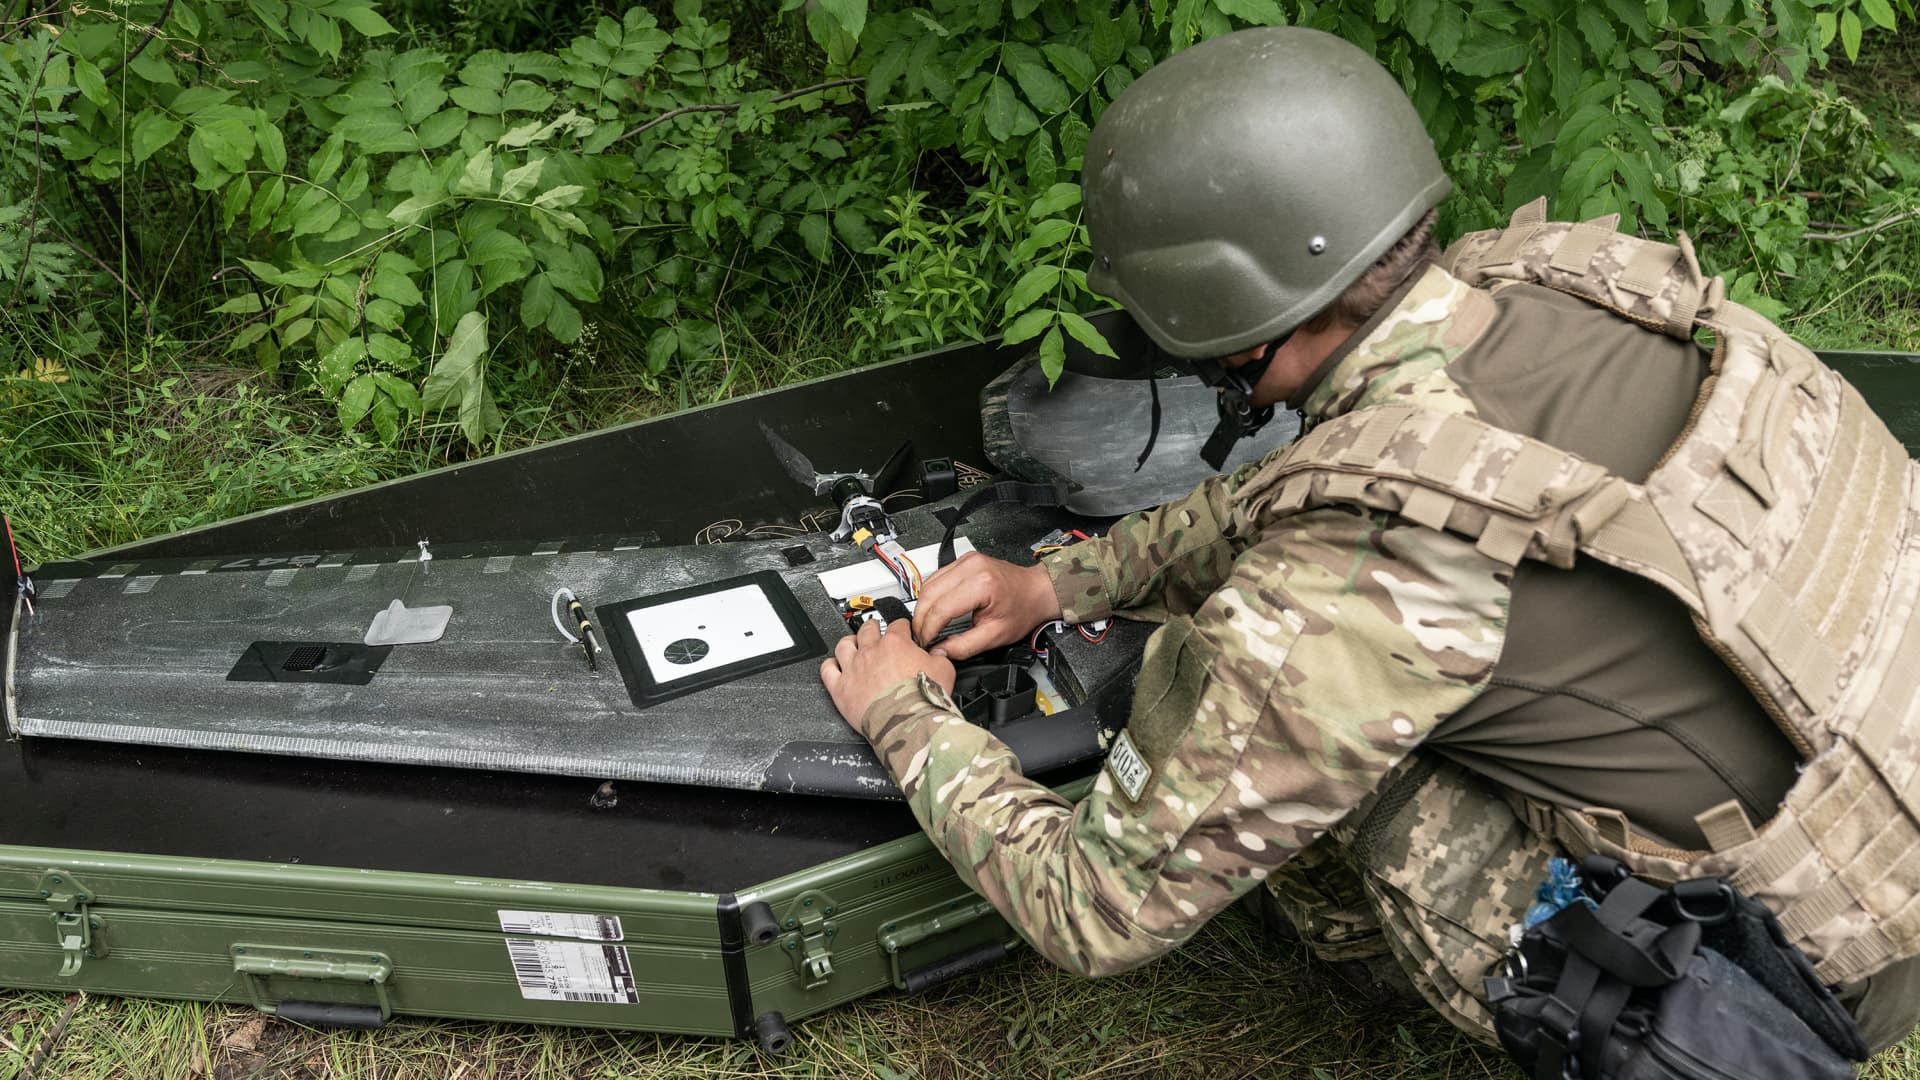 Member of Ukrainian Army Forces handles Aviation Systems of Ukraine Valkyrja drone designed and produced in Ukraine used for reconnaissance of Russian positions in undisclosed location near town of New York Donetsk region. 